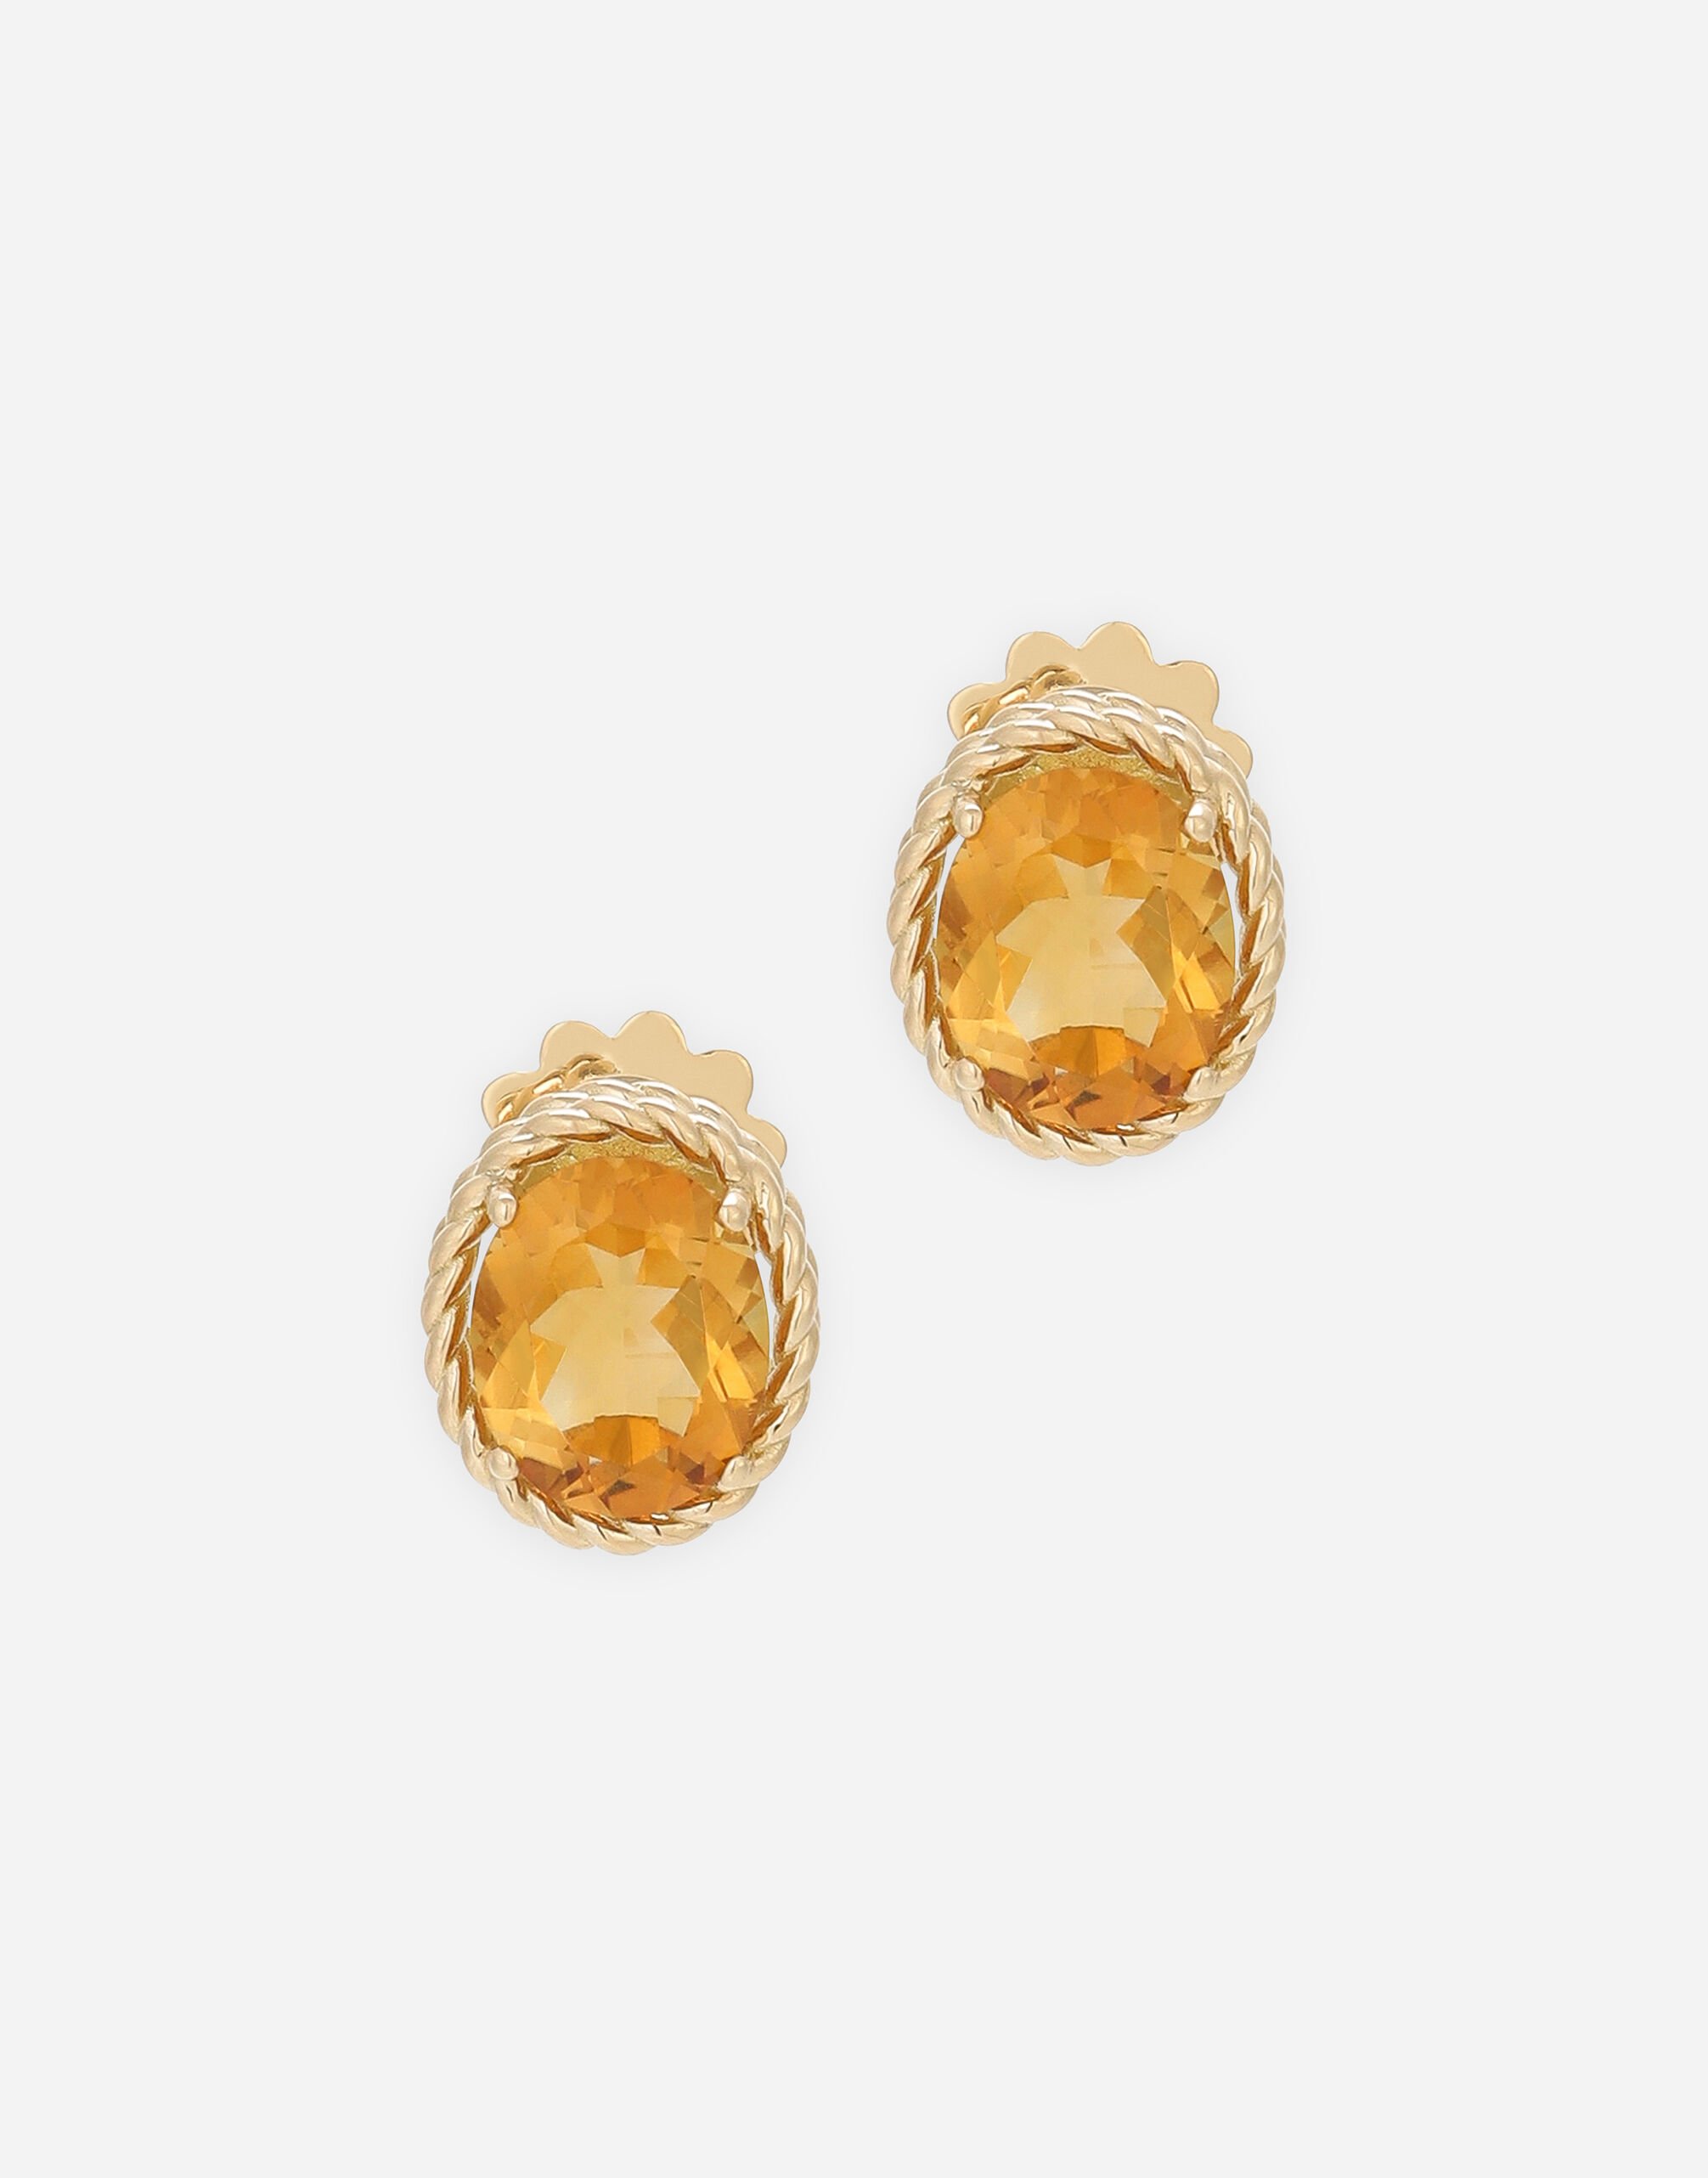 Dolce & Gabbana Anna earrings in yellow gold 18kt with citrines Red WSQB1GWQM01